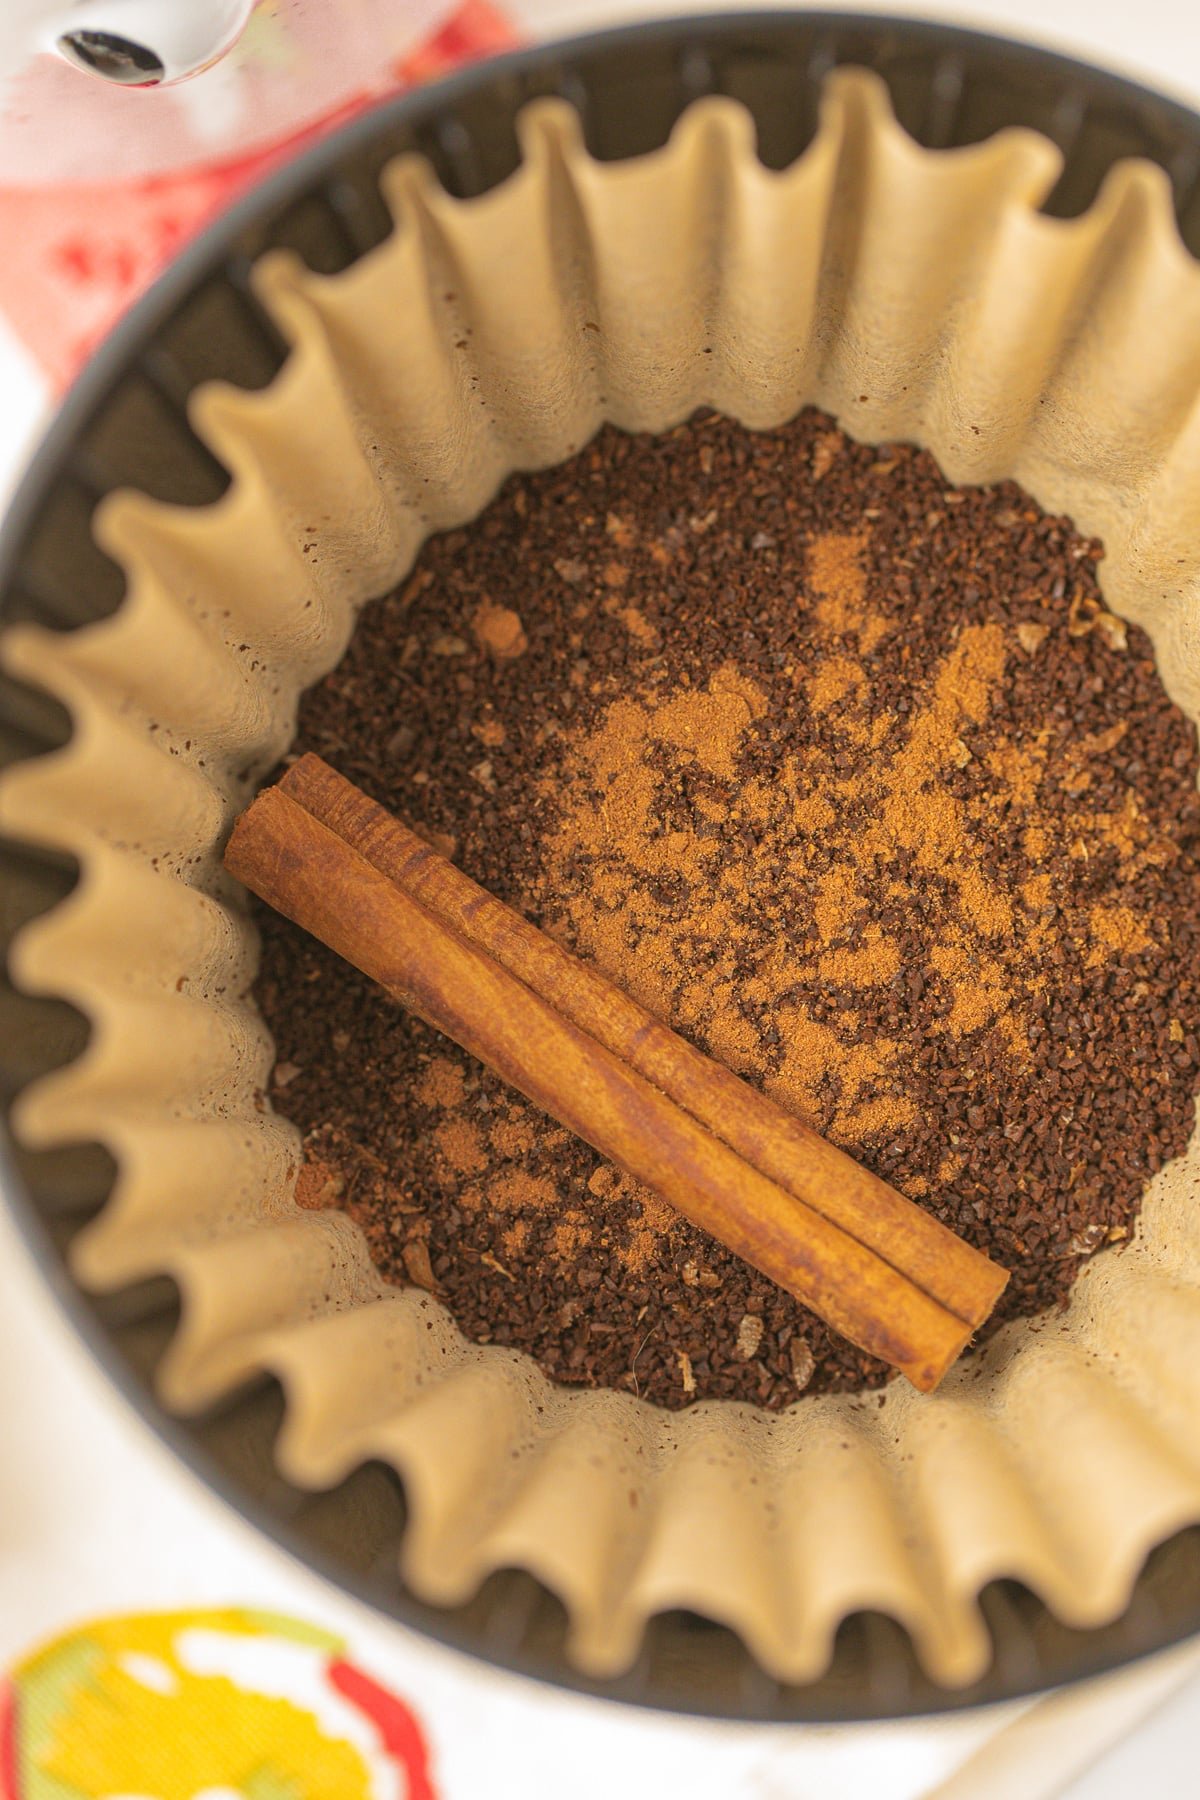 coffee filter with ground coffee, pumpkin spice, and a cinnamon stick.